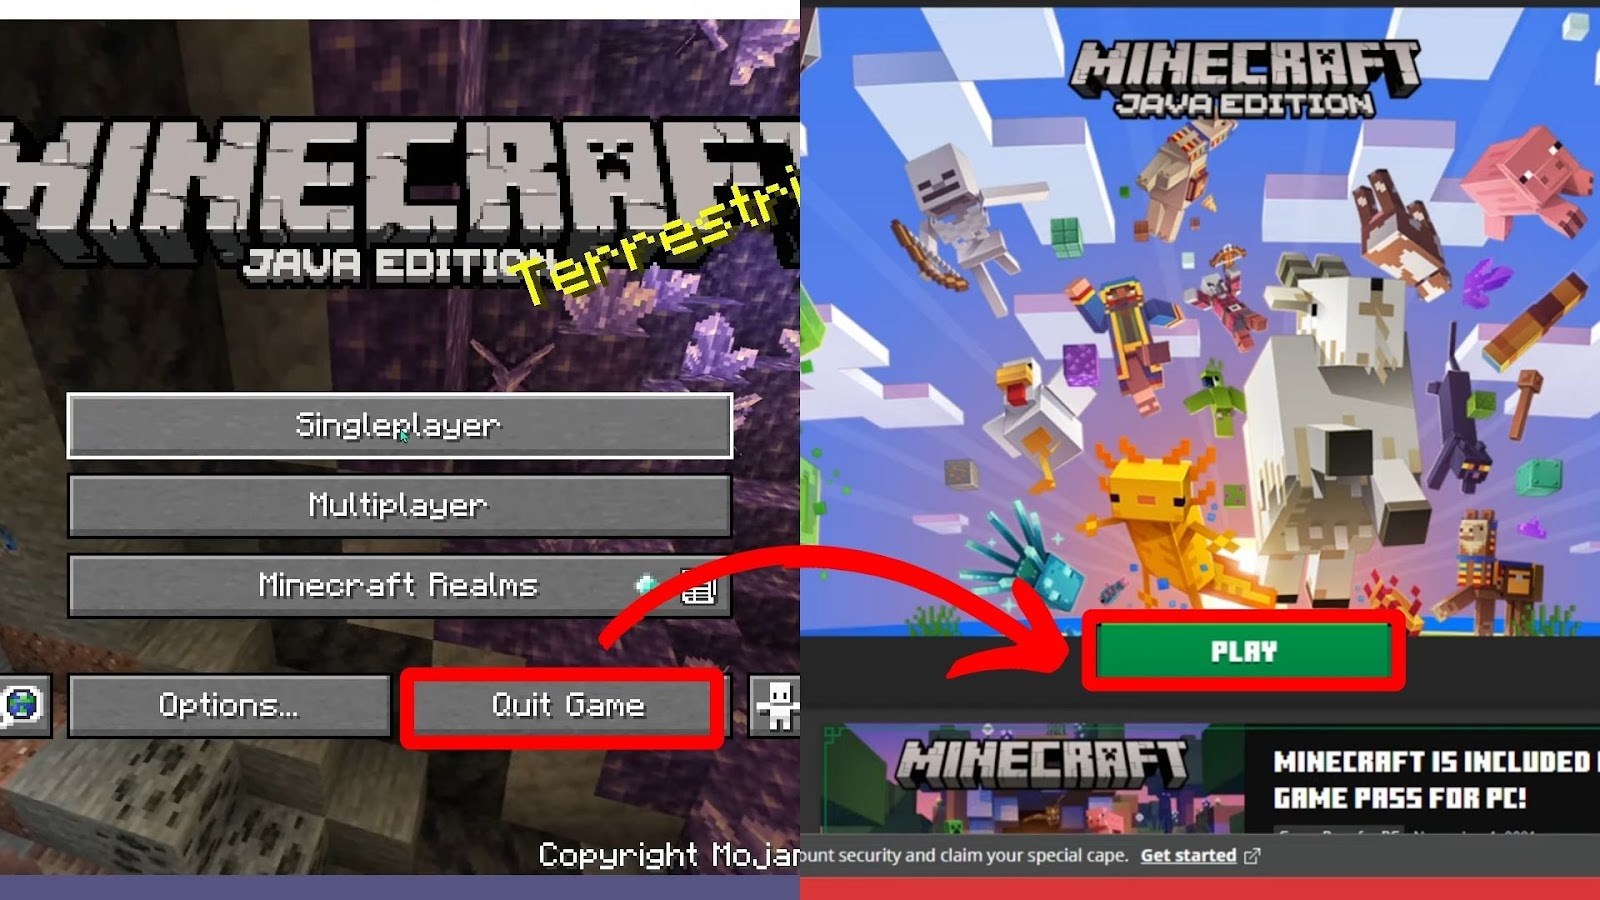 Quit the Game to Reload Chunks in Minecraft